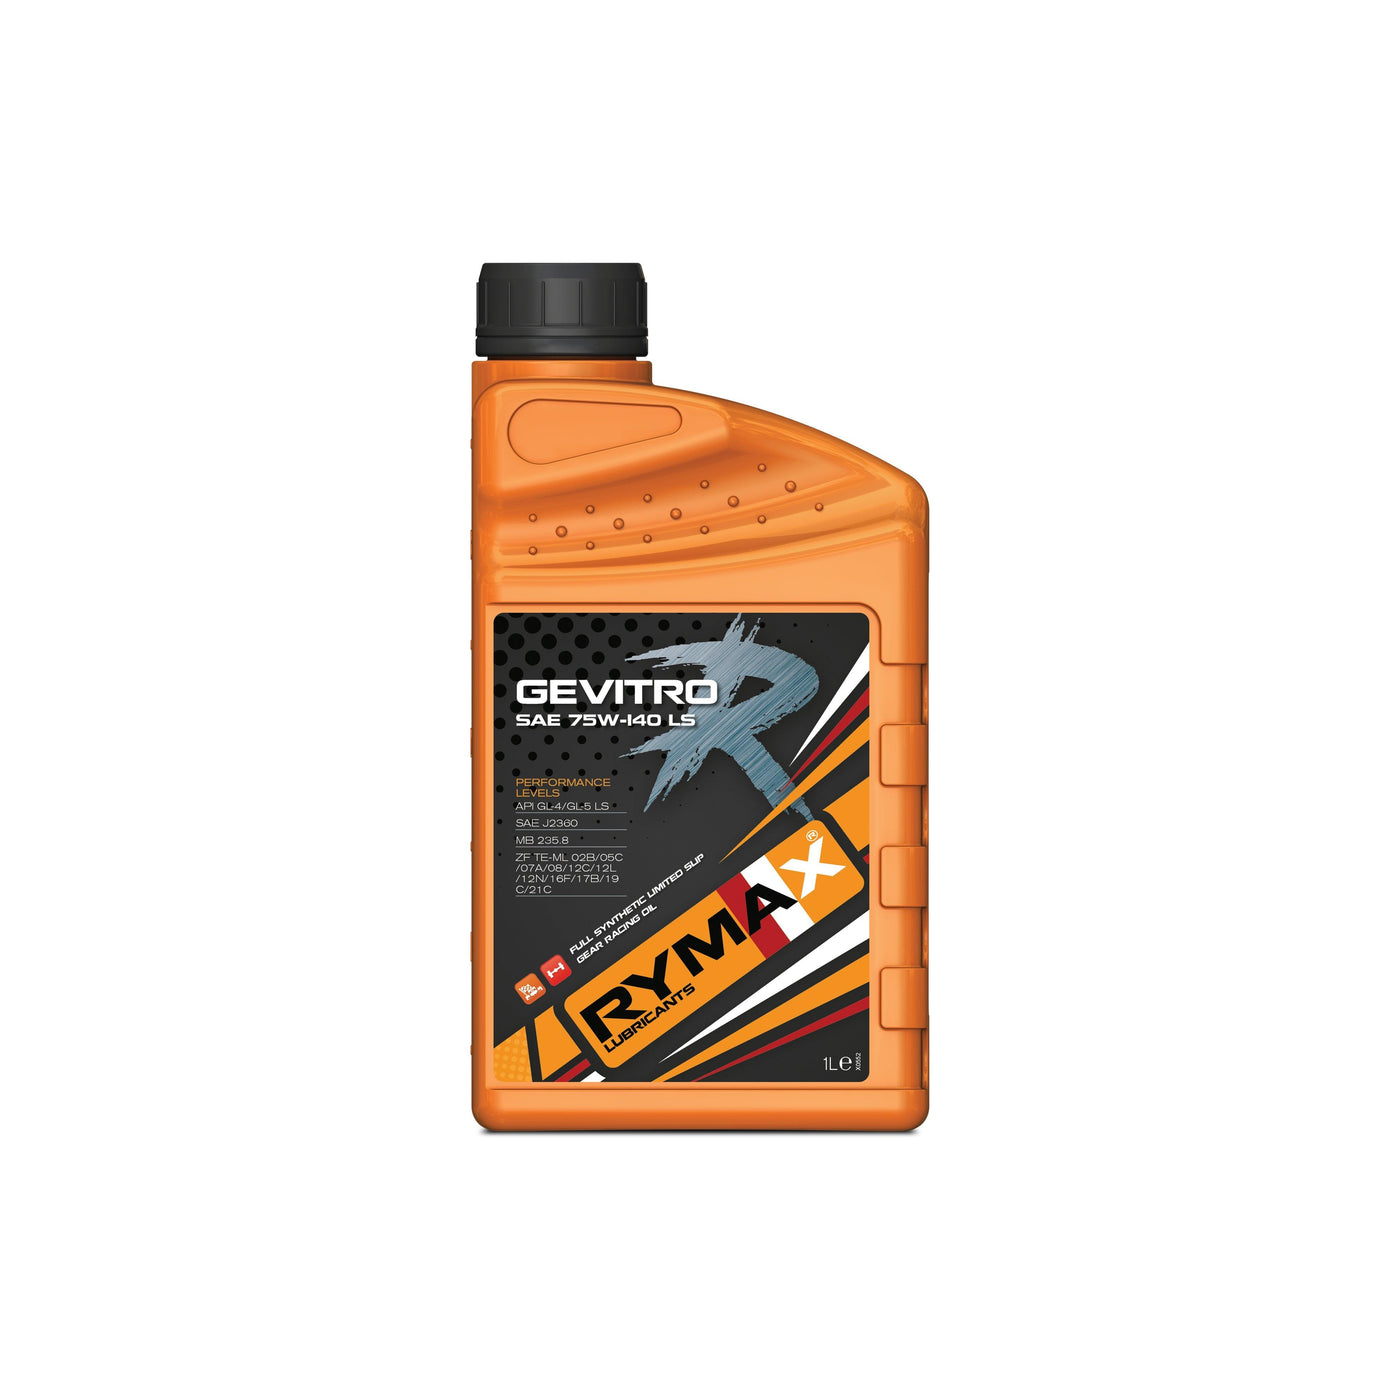 Rymax Gevitro R SAE 75W-140 LS Differential Oil - 1 Litre - Attacking the Clock Racing